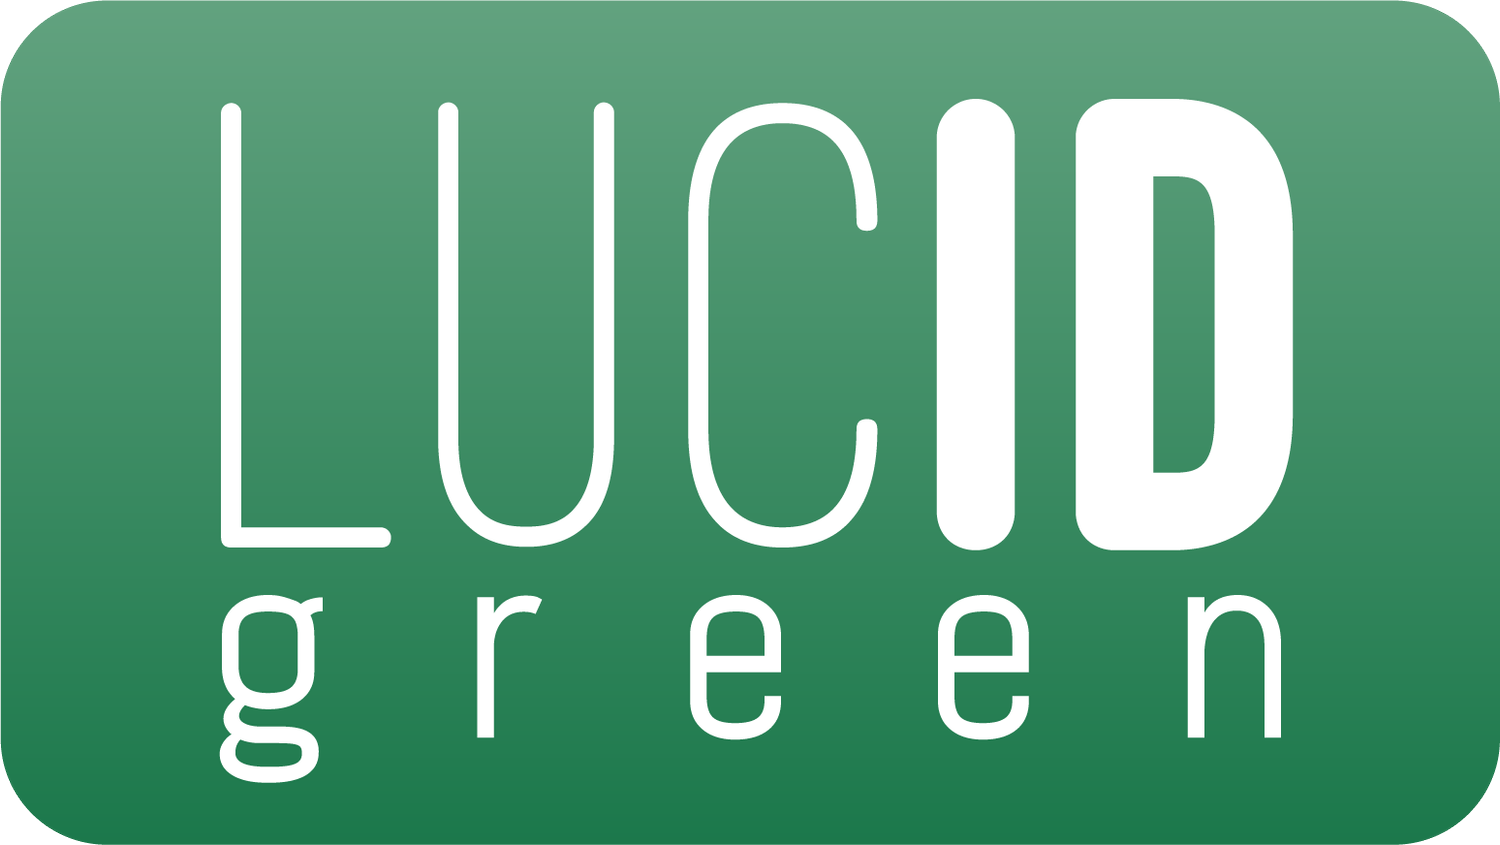 Lucid Green - The Intelligent UPC of Cannabis